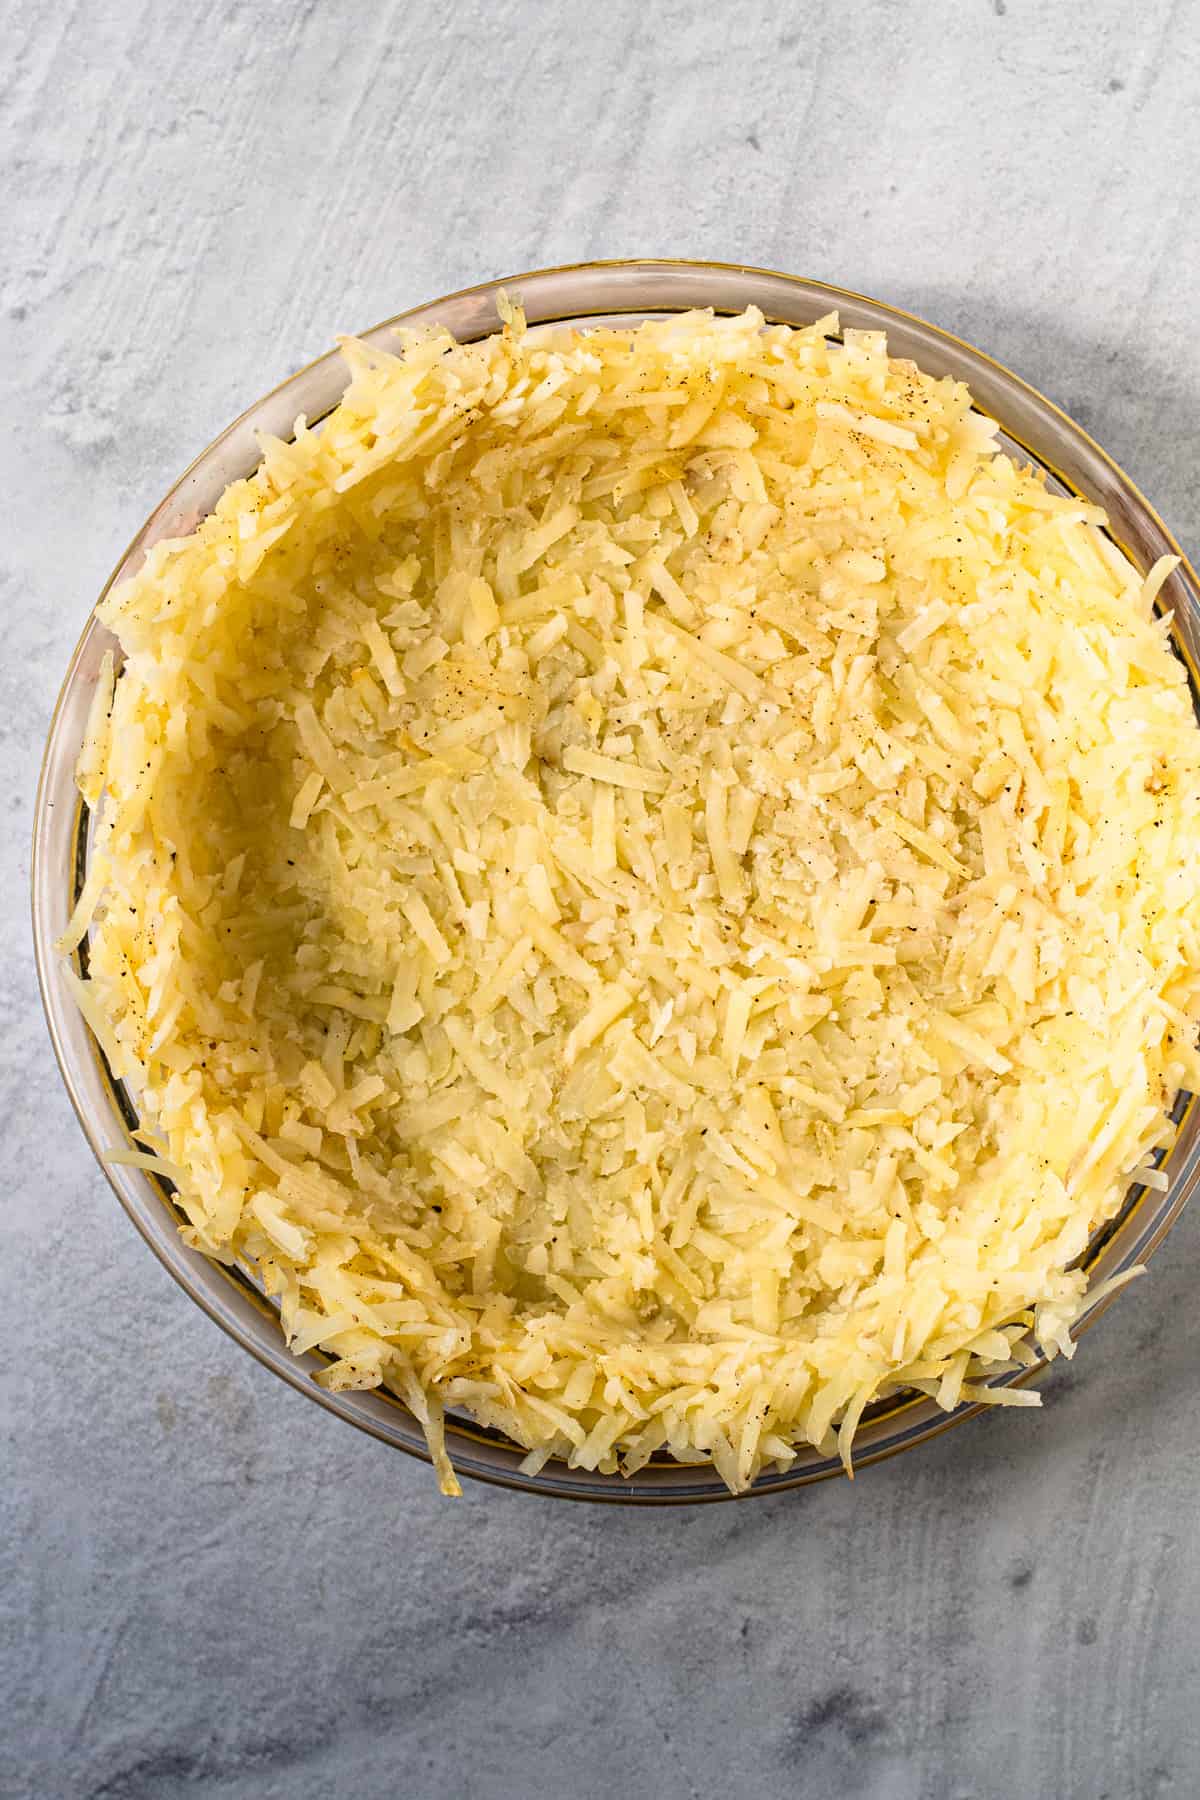 A pie crust made from frozen hash browns.